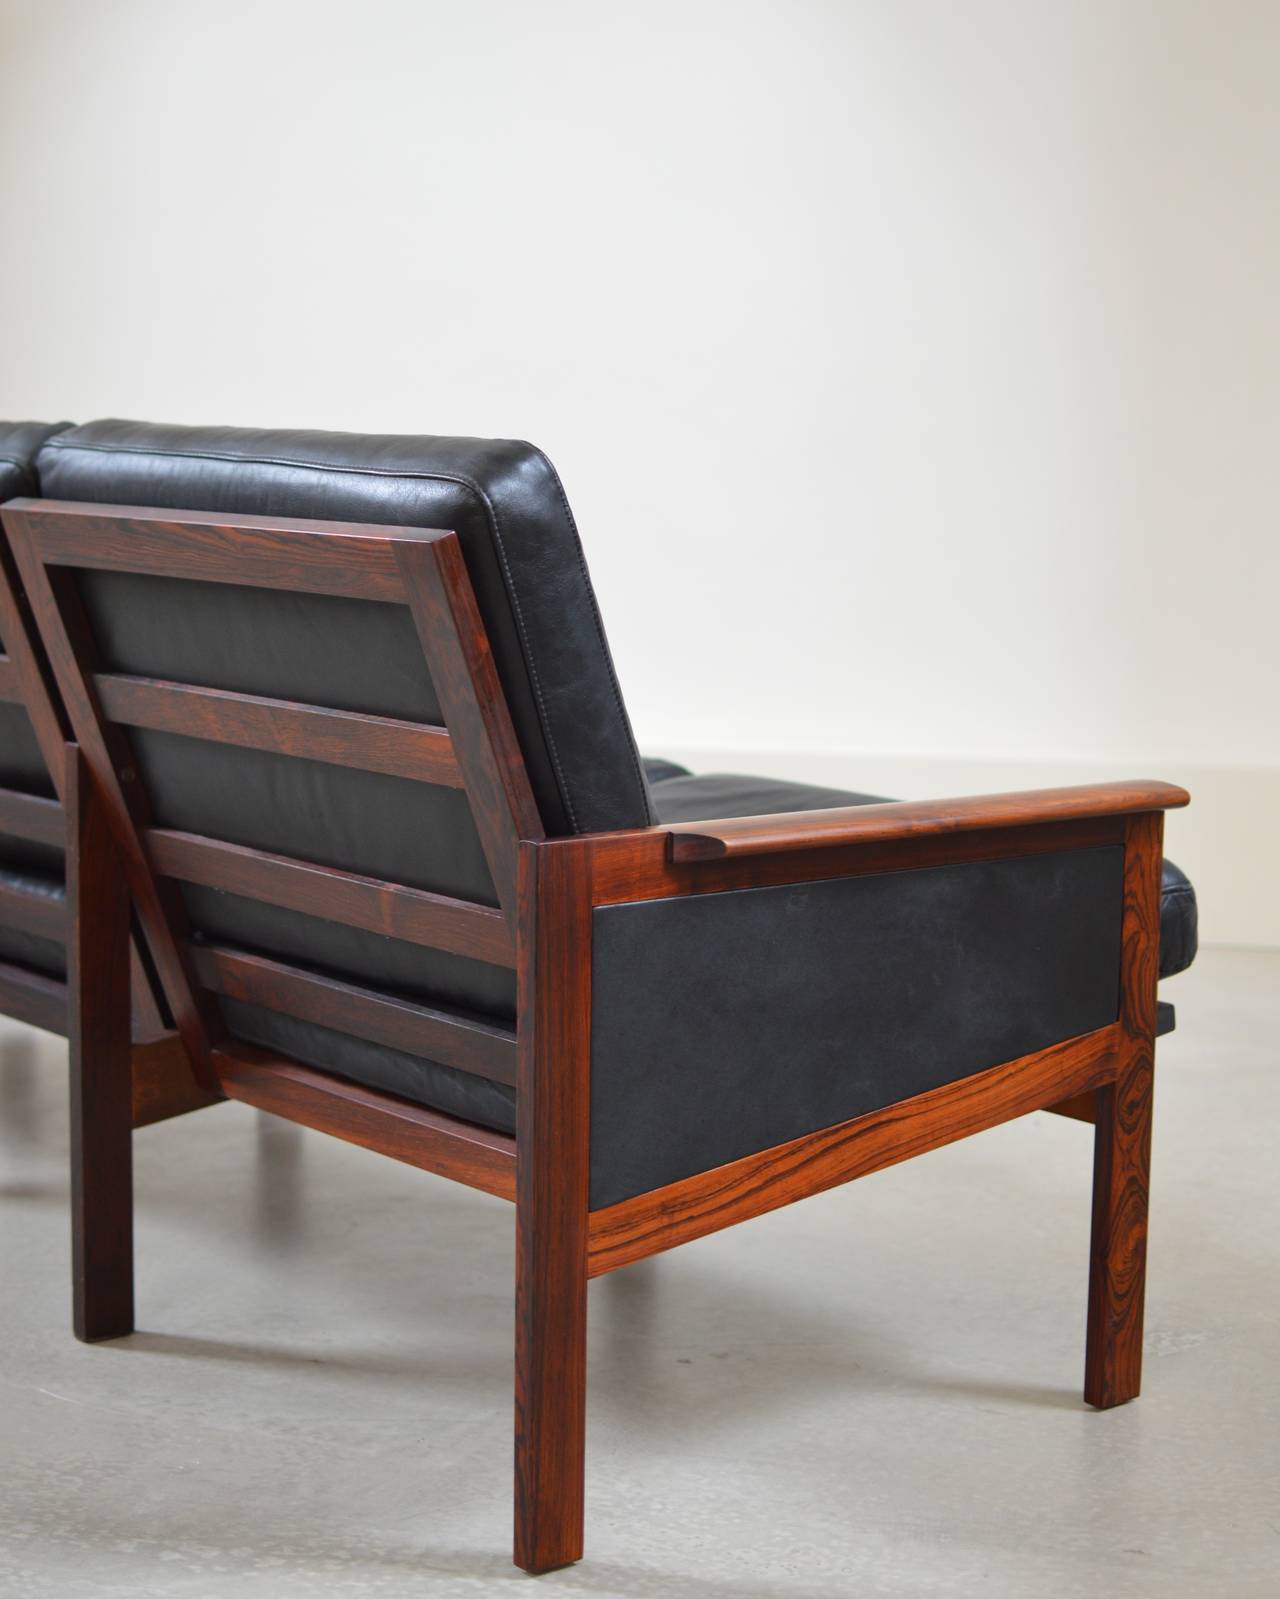 Mid-20th Century Rosewood & Black Leather Sofa by Illum Wikkelso for N. Eilersen